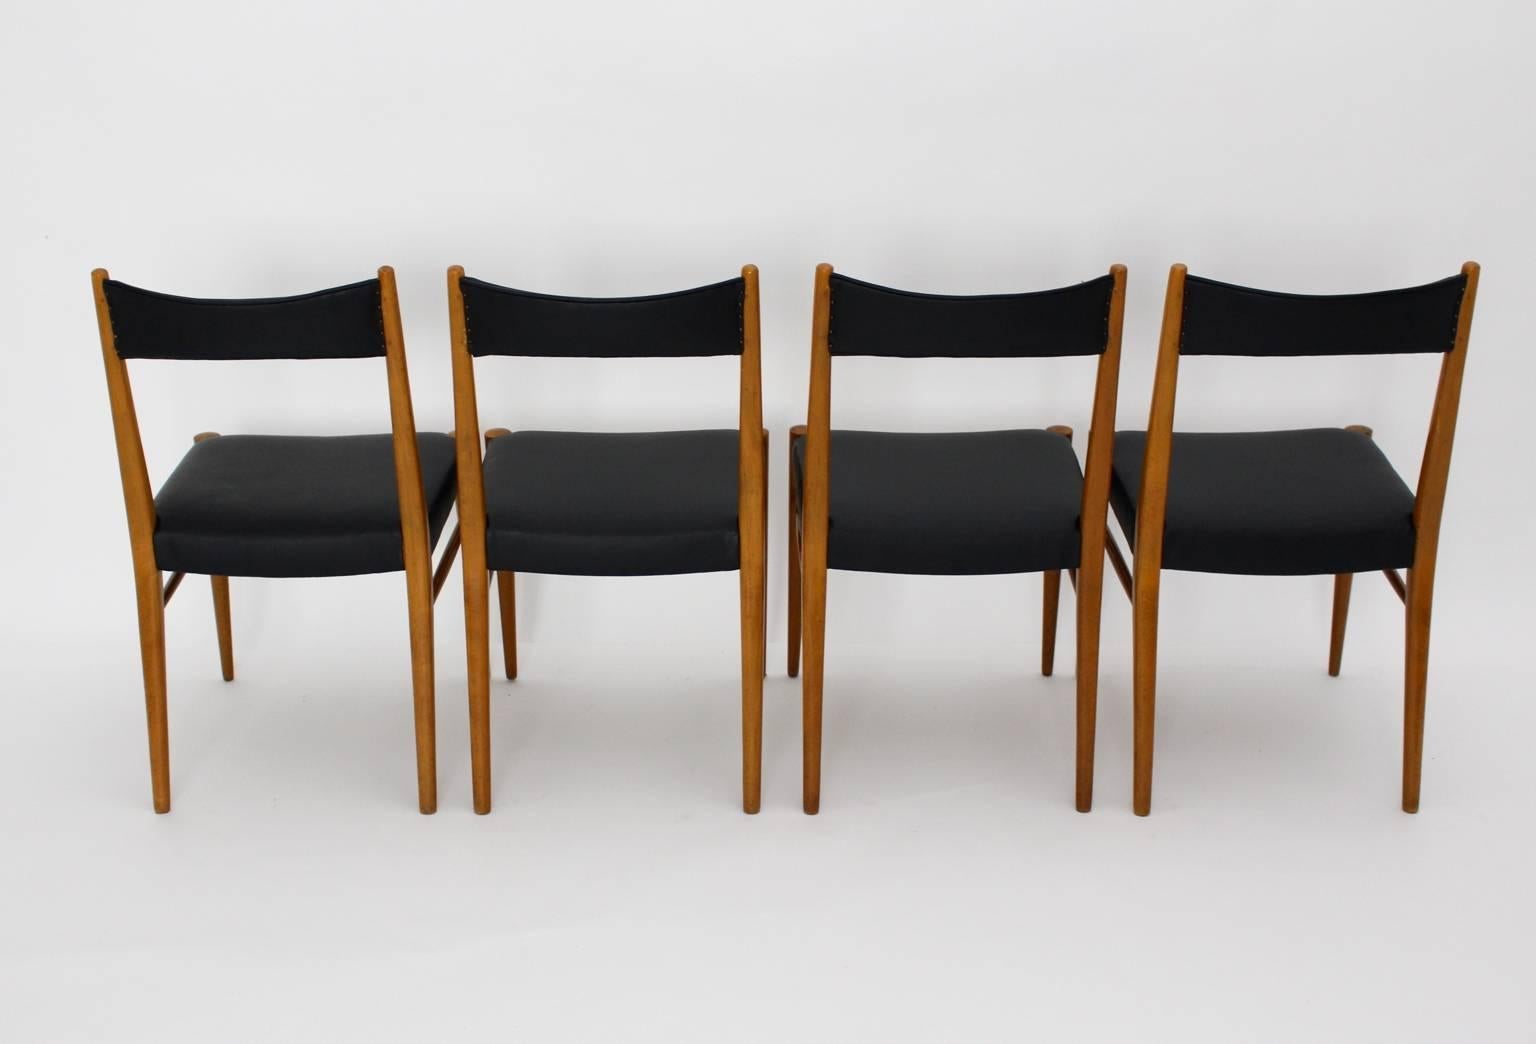 Faux Leather Mid Century Modern Vintage Dining Room Chairs by Anna-Lülja Praun, 1953 Vienna For Sale